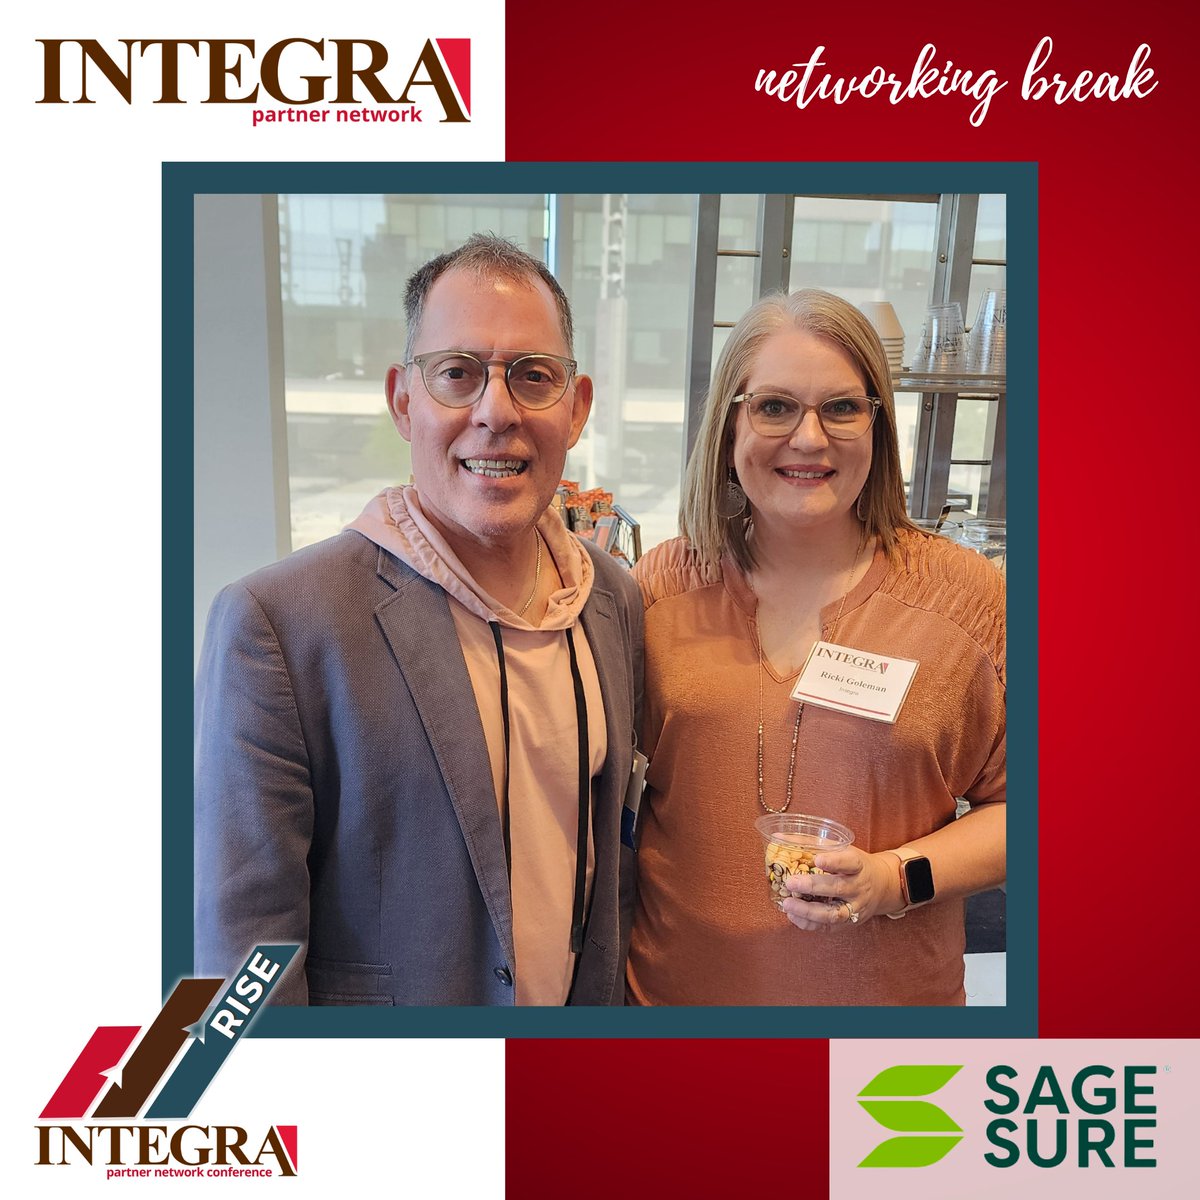 Thank you to @SageSure Insurance for sponsoring a networking snack break for our Integra Partner Network agents. We loved the elevated 'build our own trail mix' bar! 

#sagesure #integrapartnernetwork #insurance #independentagent #independentagency #agencynetwork #findyourway